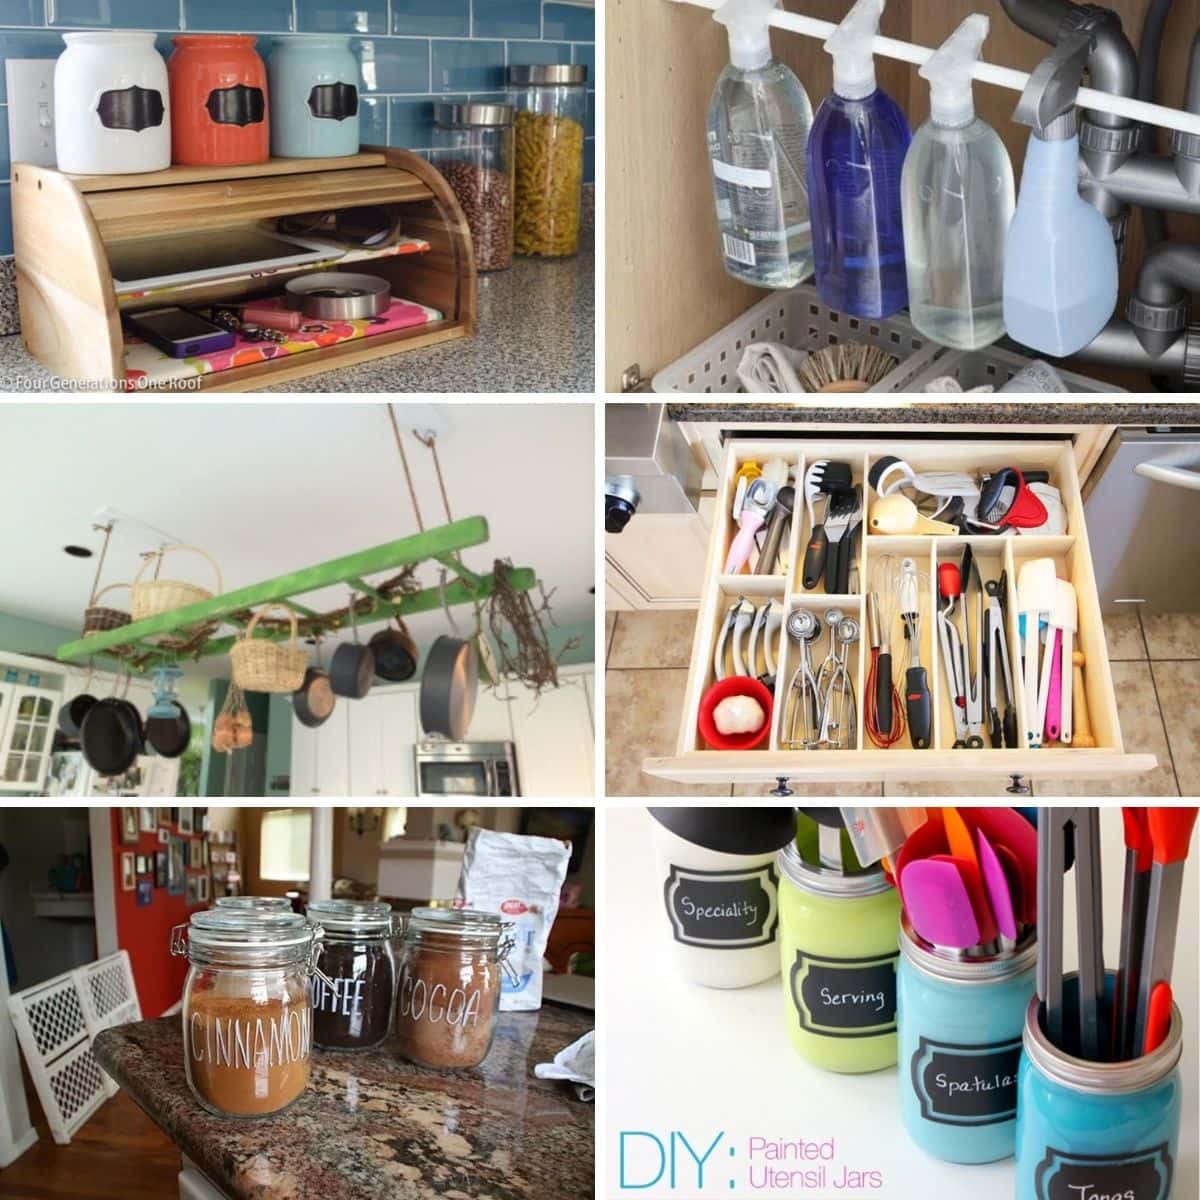 Small Kitchen DIY Organization Ideas - Cool Ideas for Small Kitchens